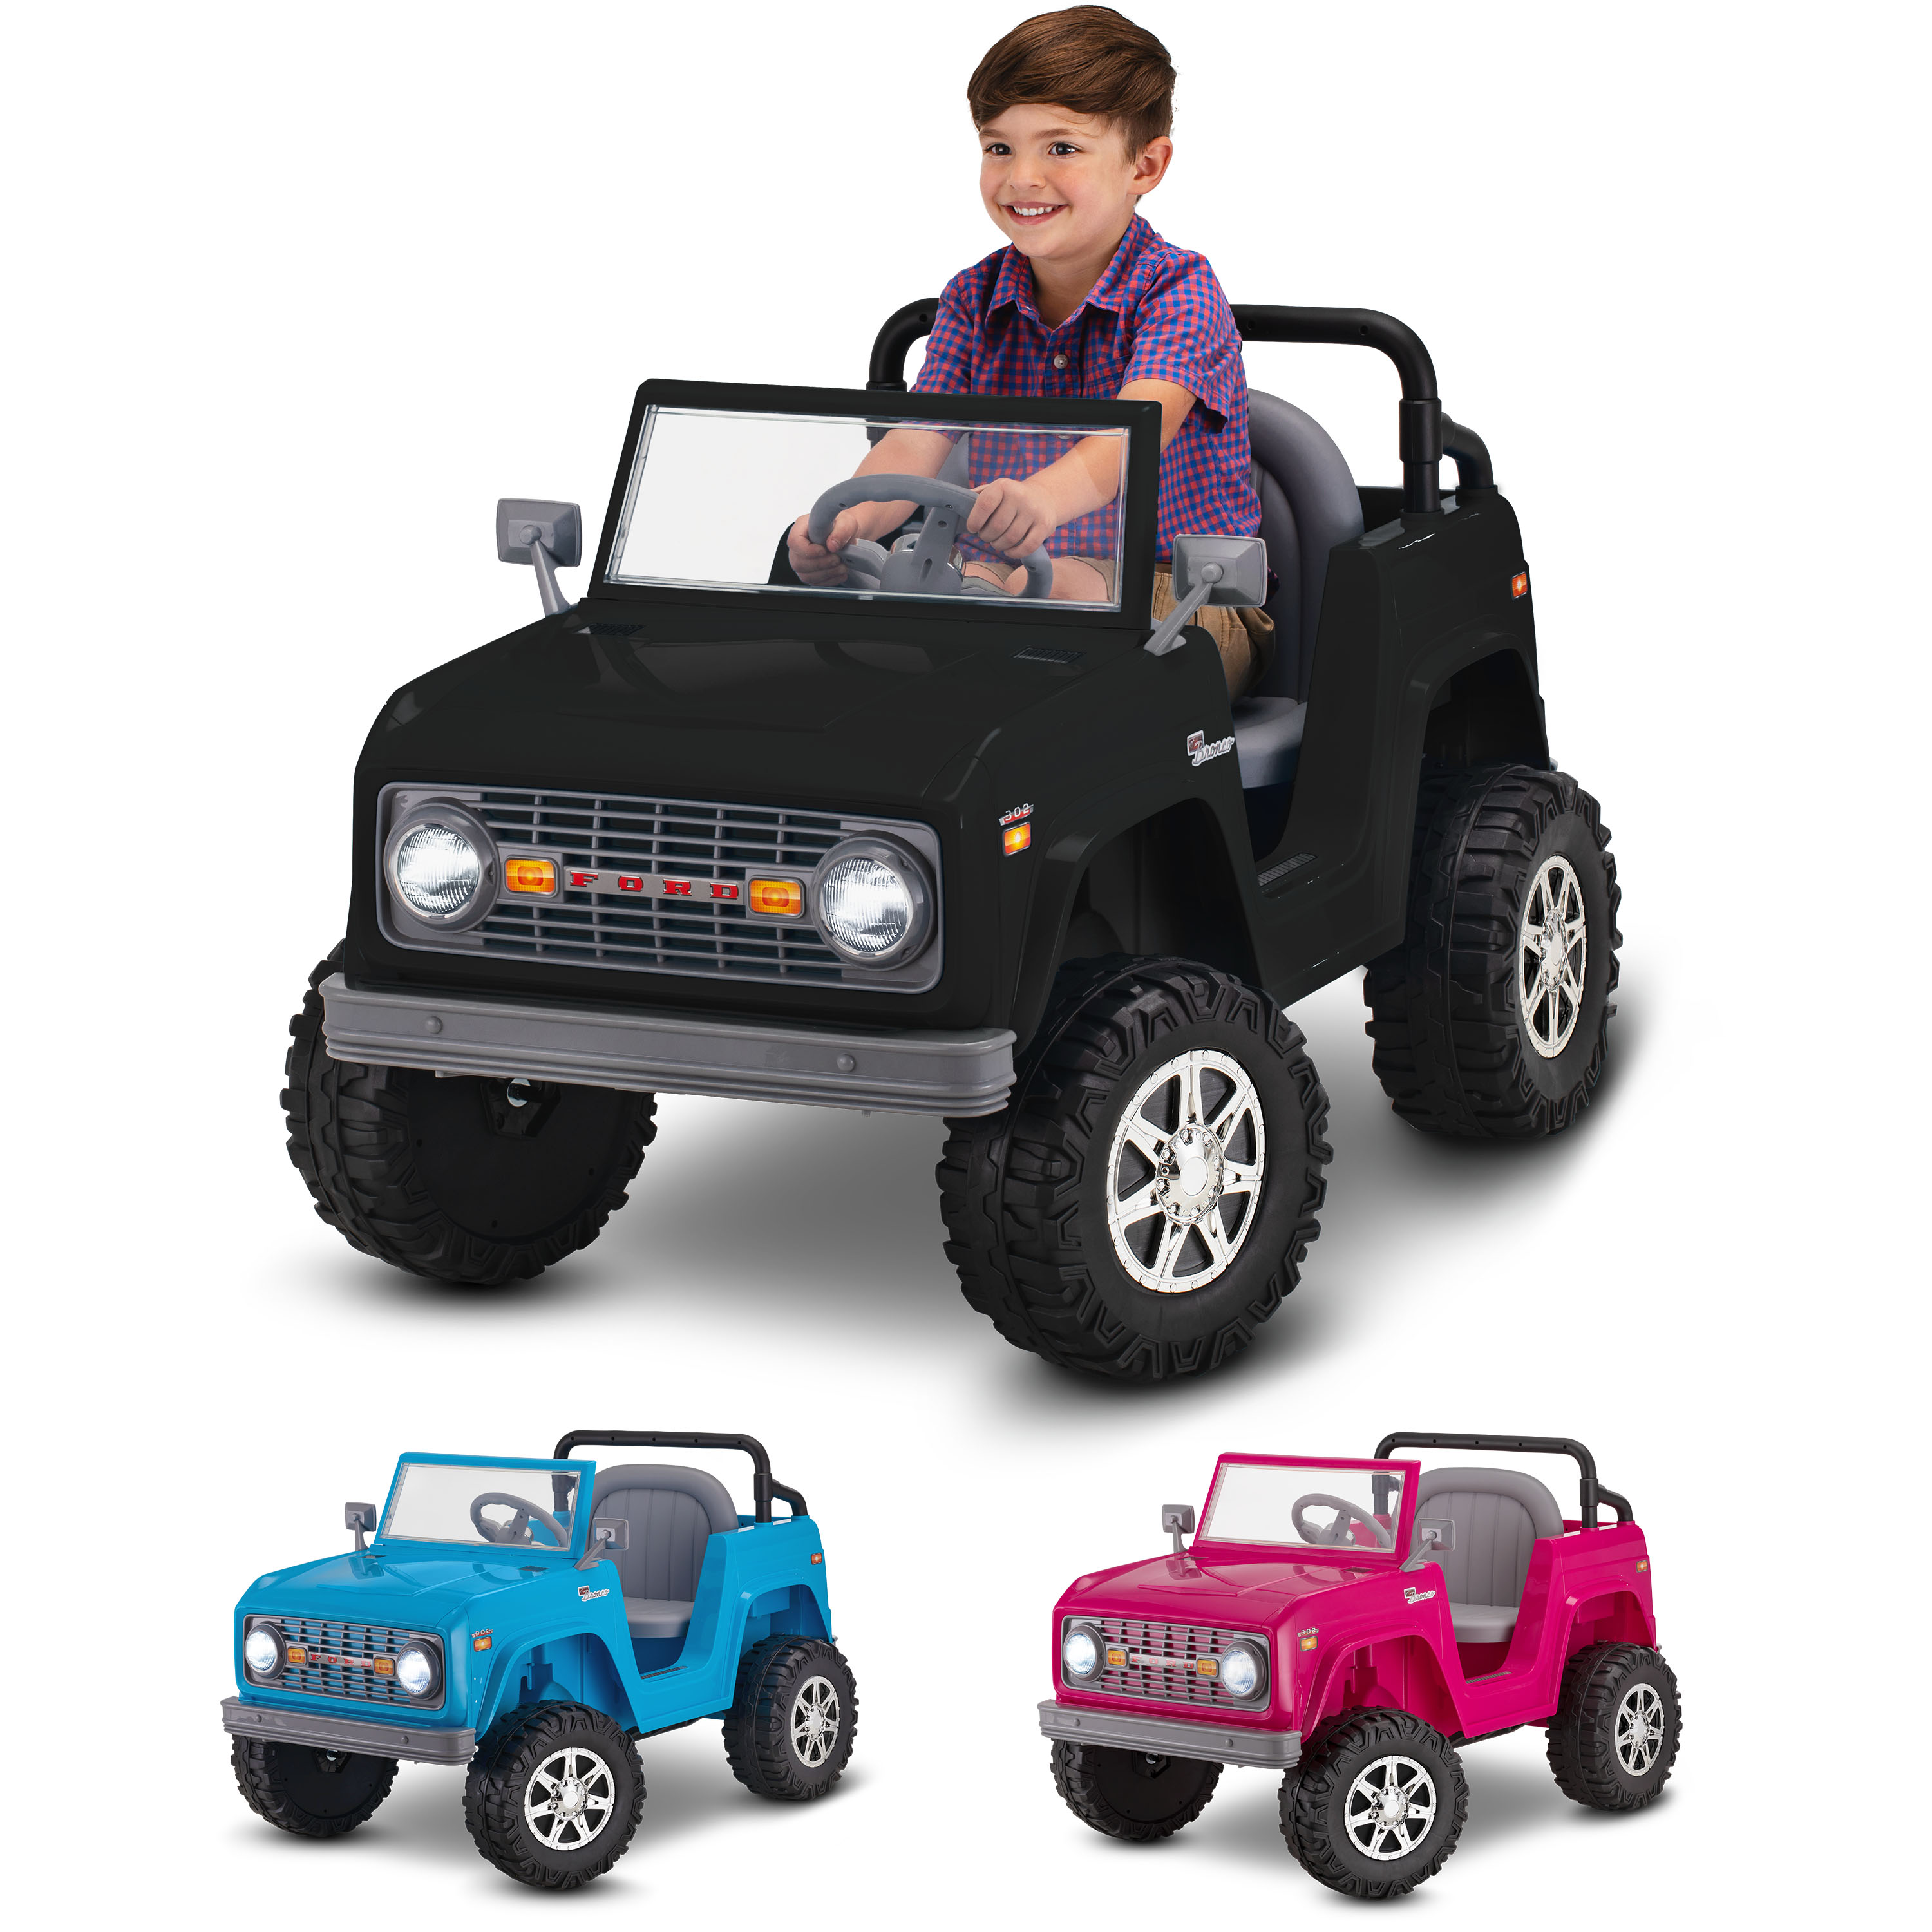 Kid Trax Classic Ford Bronco Ride-On Toy, 6-Volt, Black - image 1 of 5